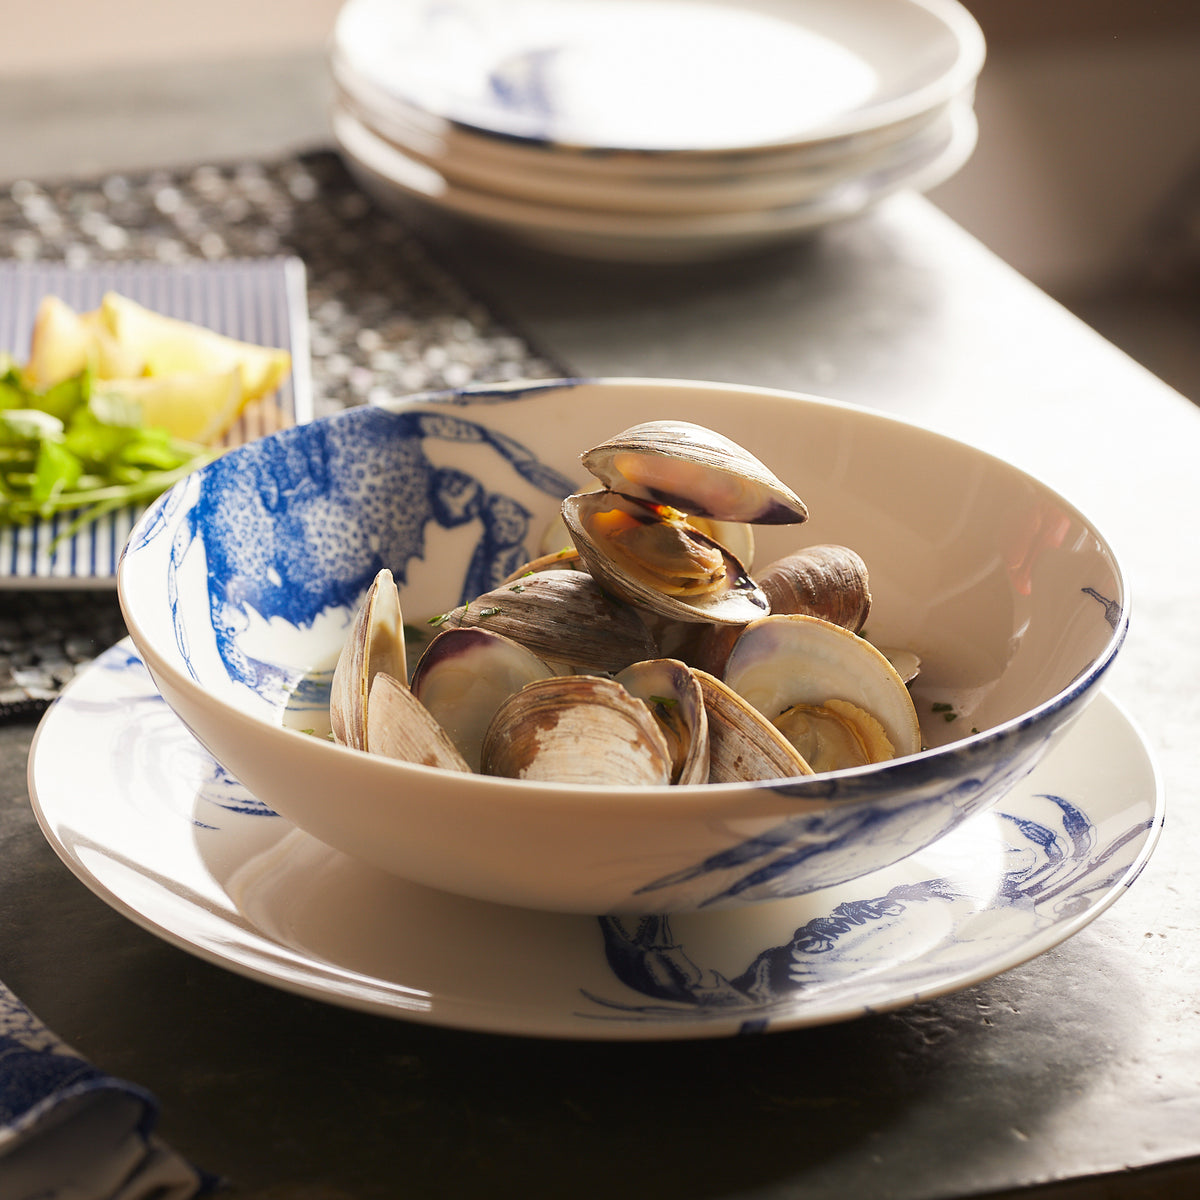 A bowl with a blue and white design is filled with steamed clams, evoking the charm of Caskata&#39;s Lobster Boil Bundle. Plates and green herbs are in the background.